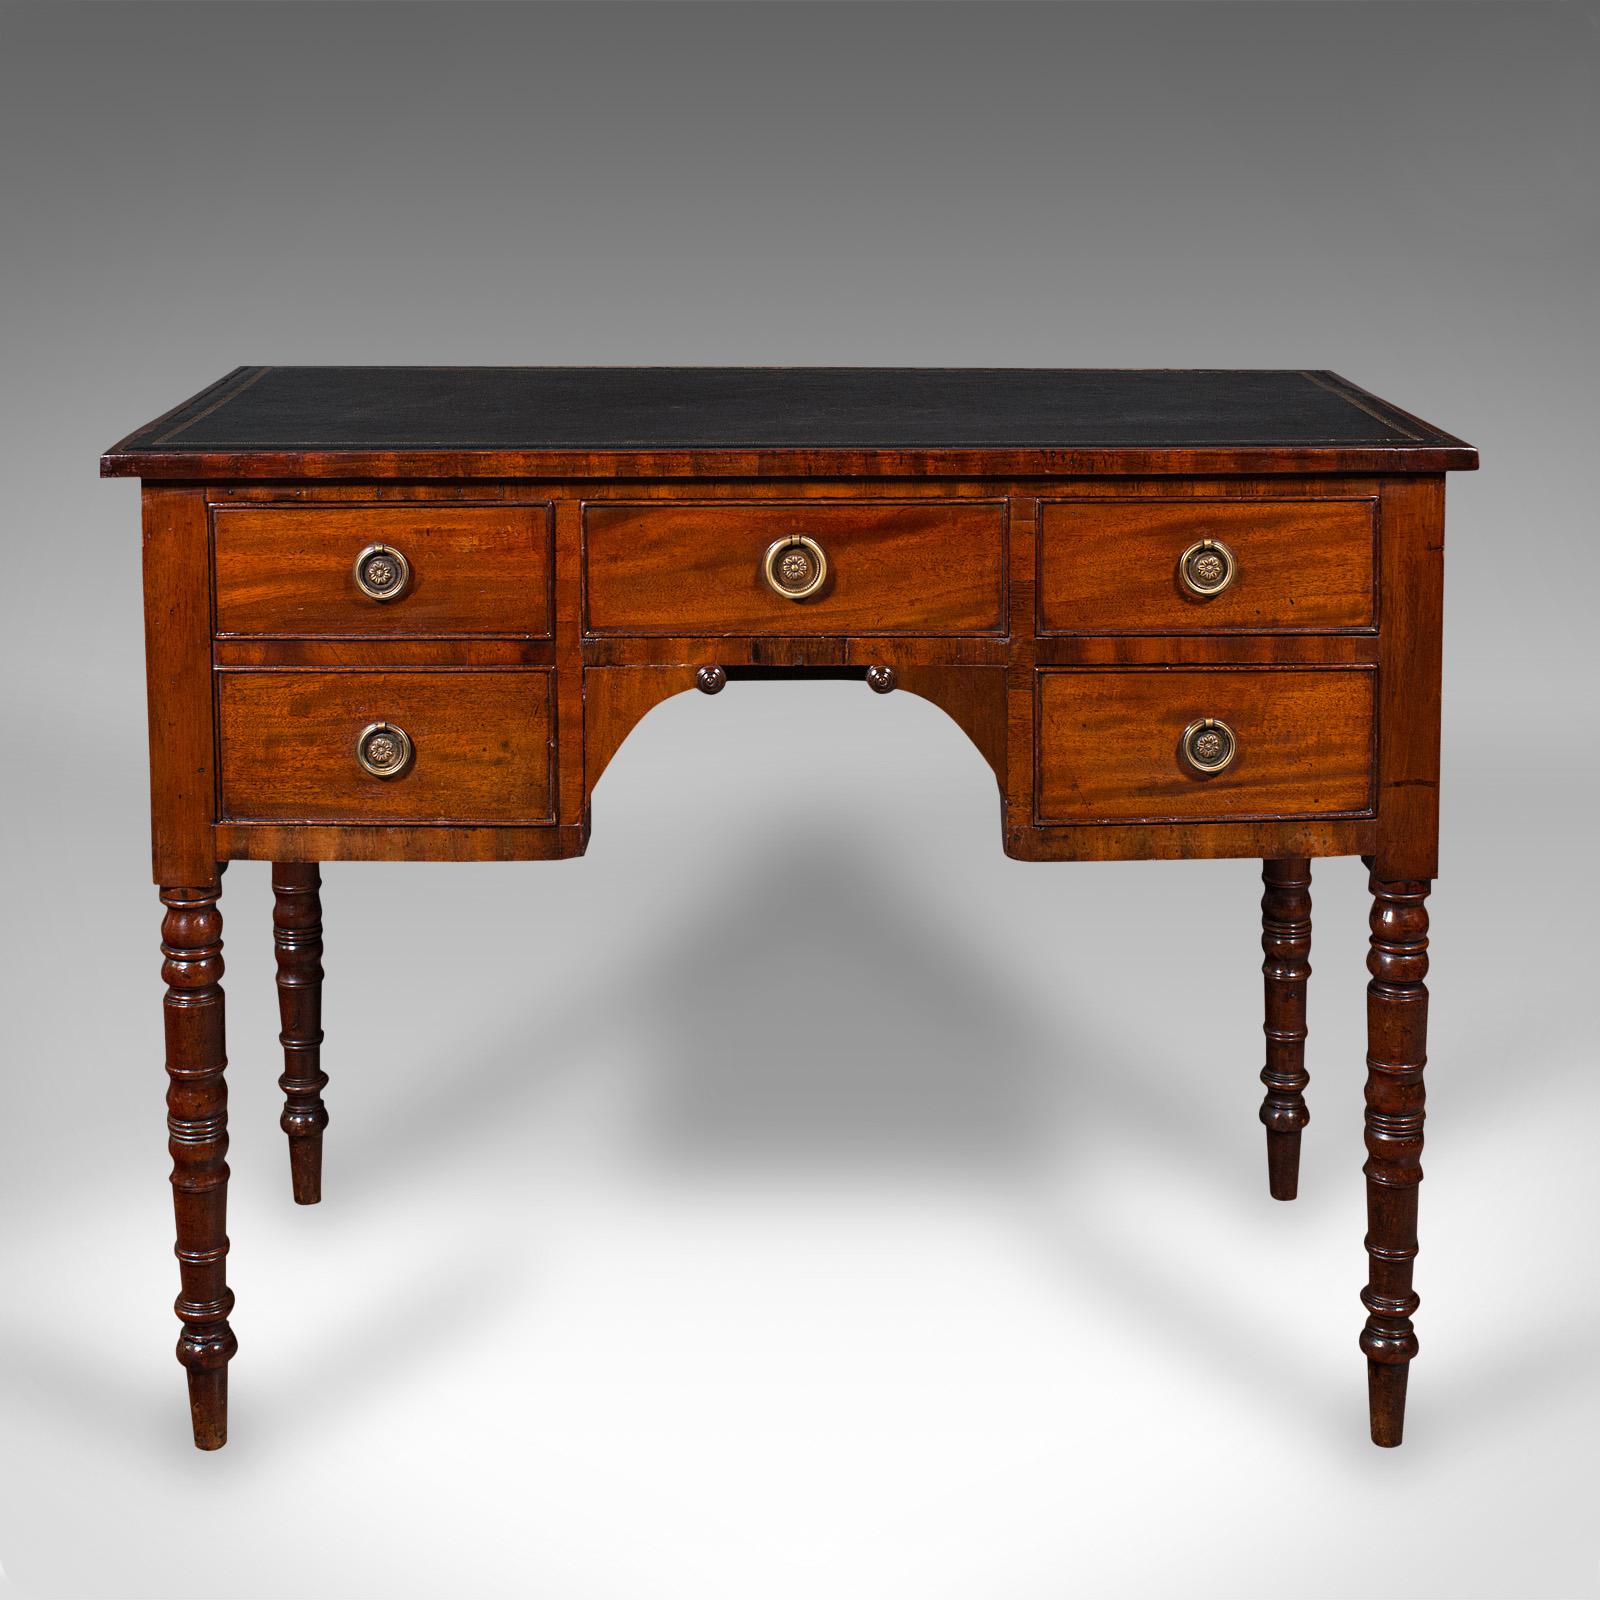 This is an antique ladies writing desk. An English, mahogany and leather correspondence table, dating to the early Victorian period, circa 1850.

Pleasingly petite desk with a delightful appearance
Displays a desirable aged patina and in good